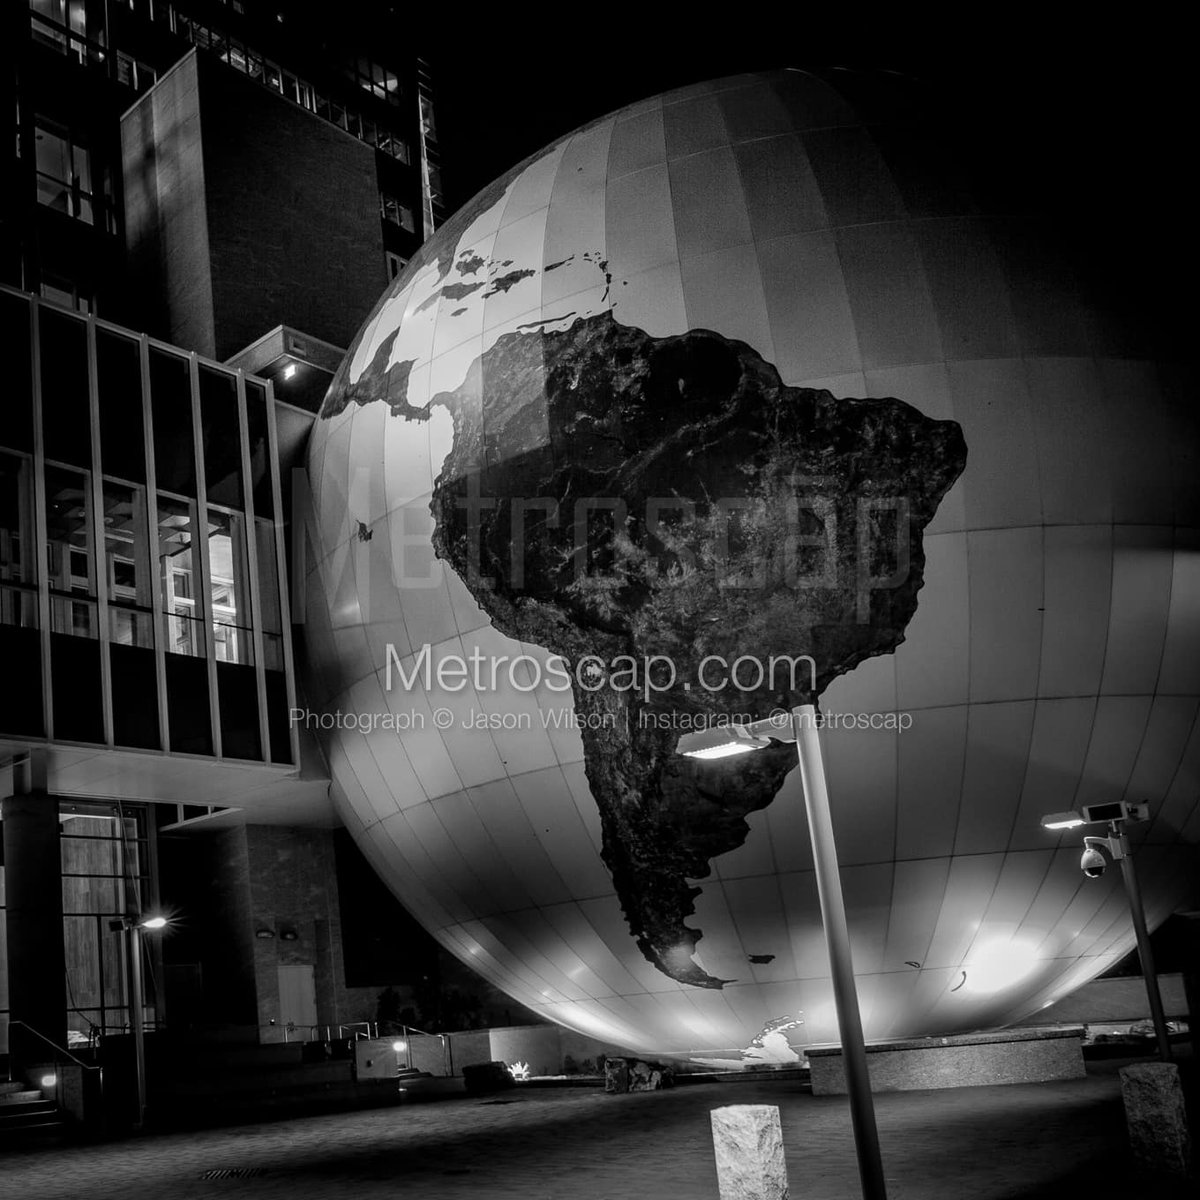 Raleigh art Black & White: The Giant Globe at the NC State of Natural Sciences #raleigh #raleighnc #downtownraleigh #visitraleigh #northcarolina #nc #BlackWhite | metroscap.com/raleigh-skylin…